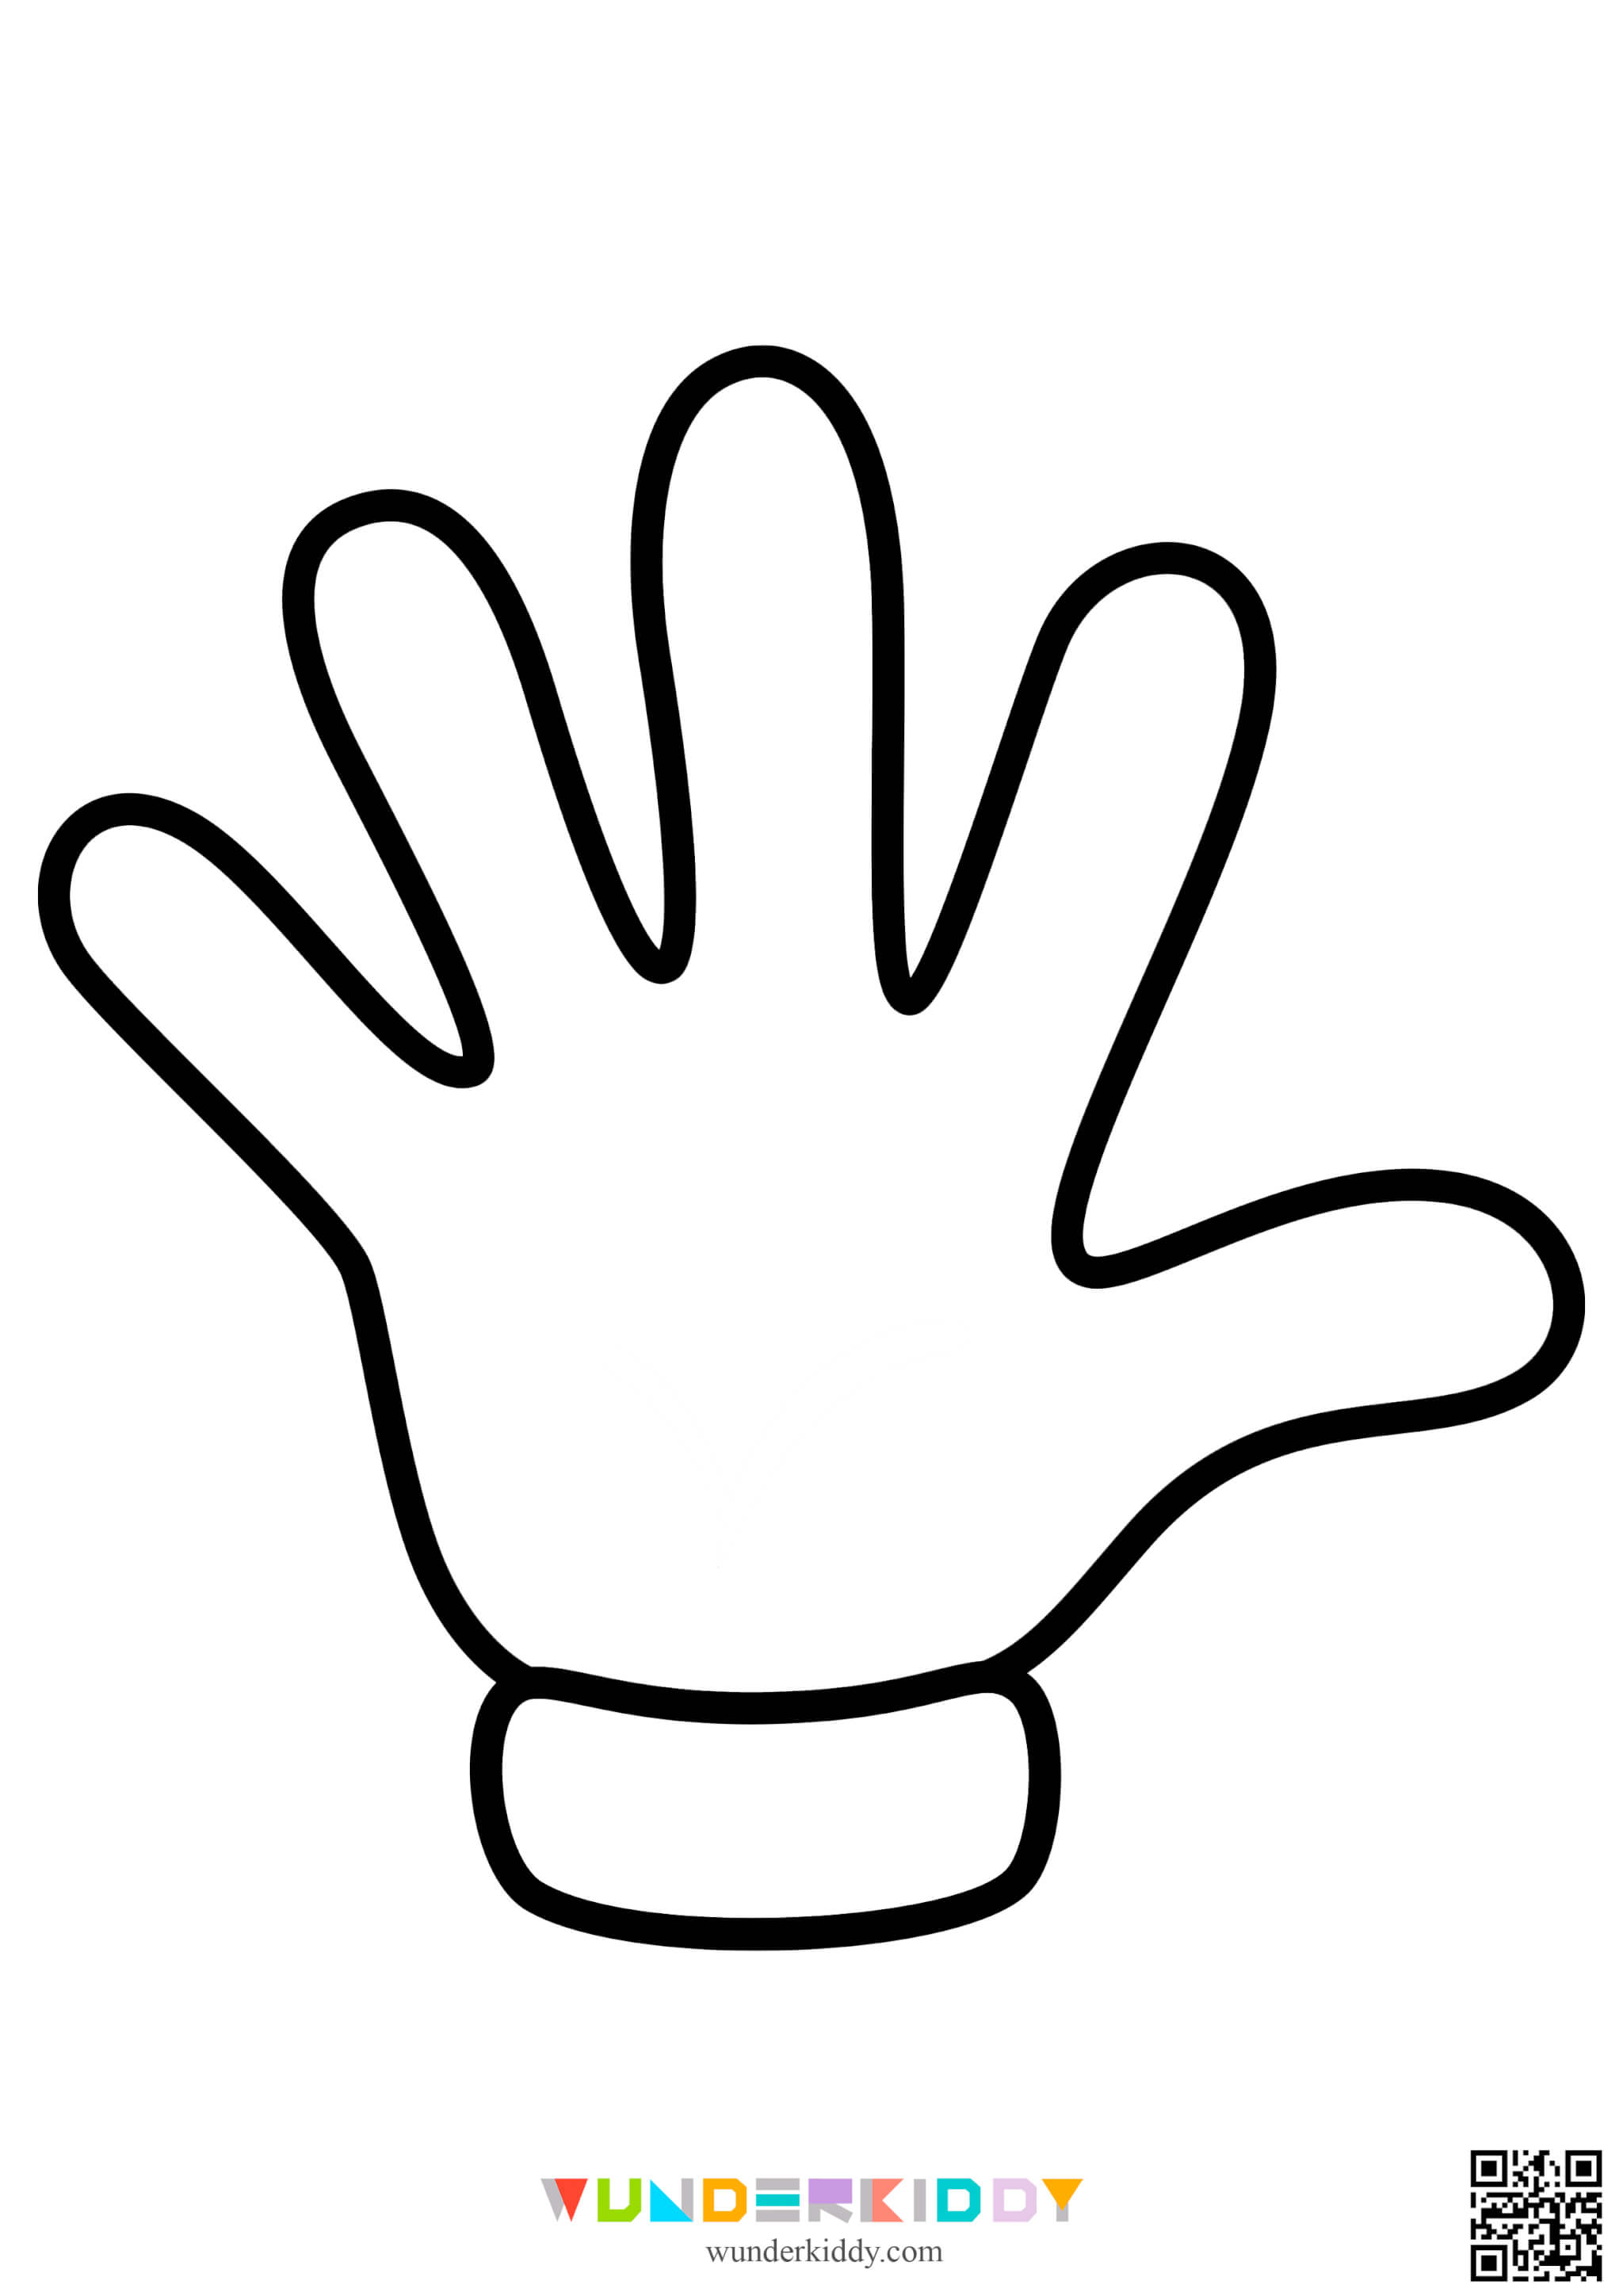 Printable Hands Template - Image 7